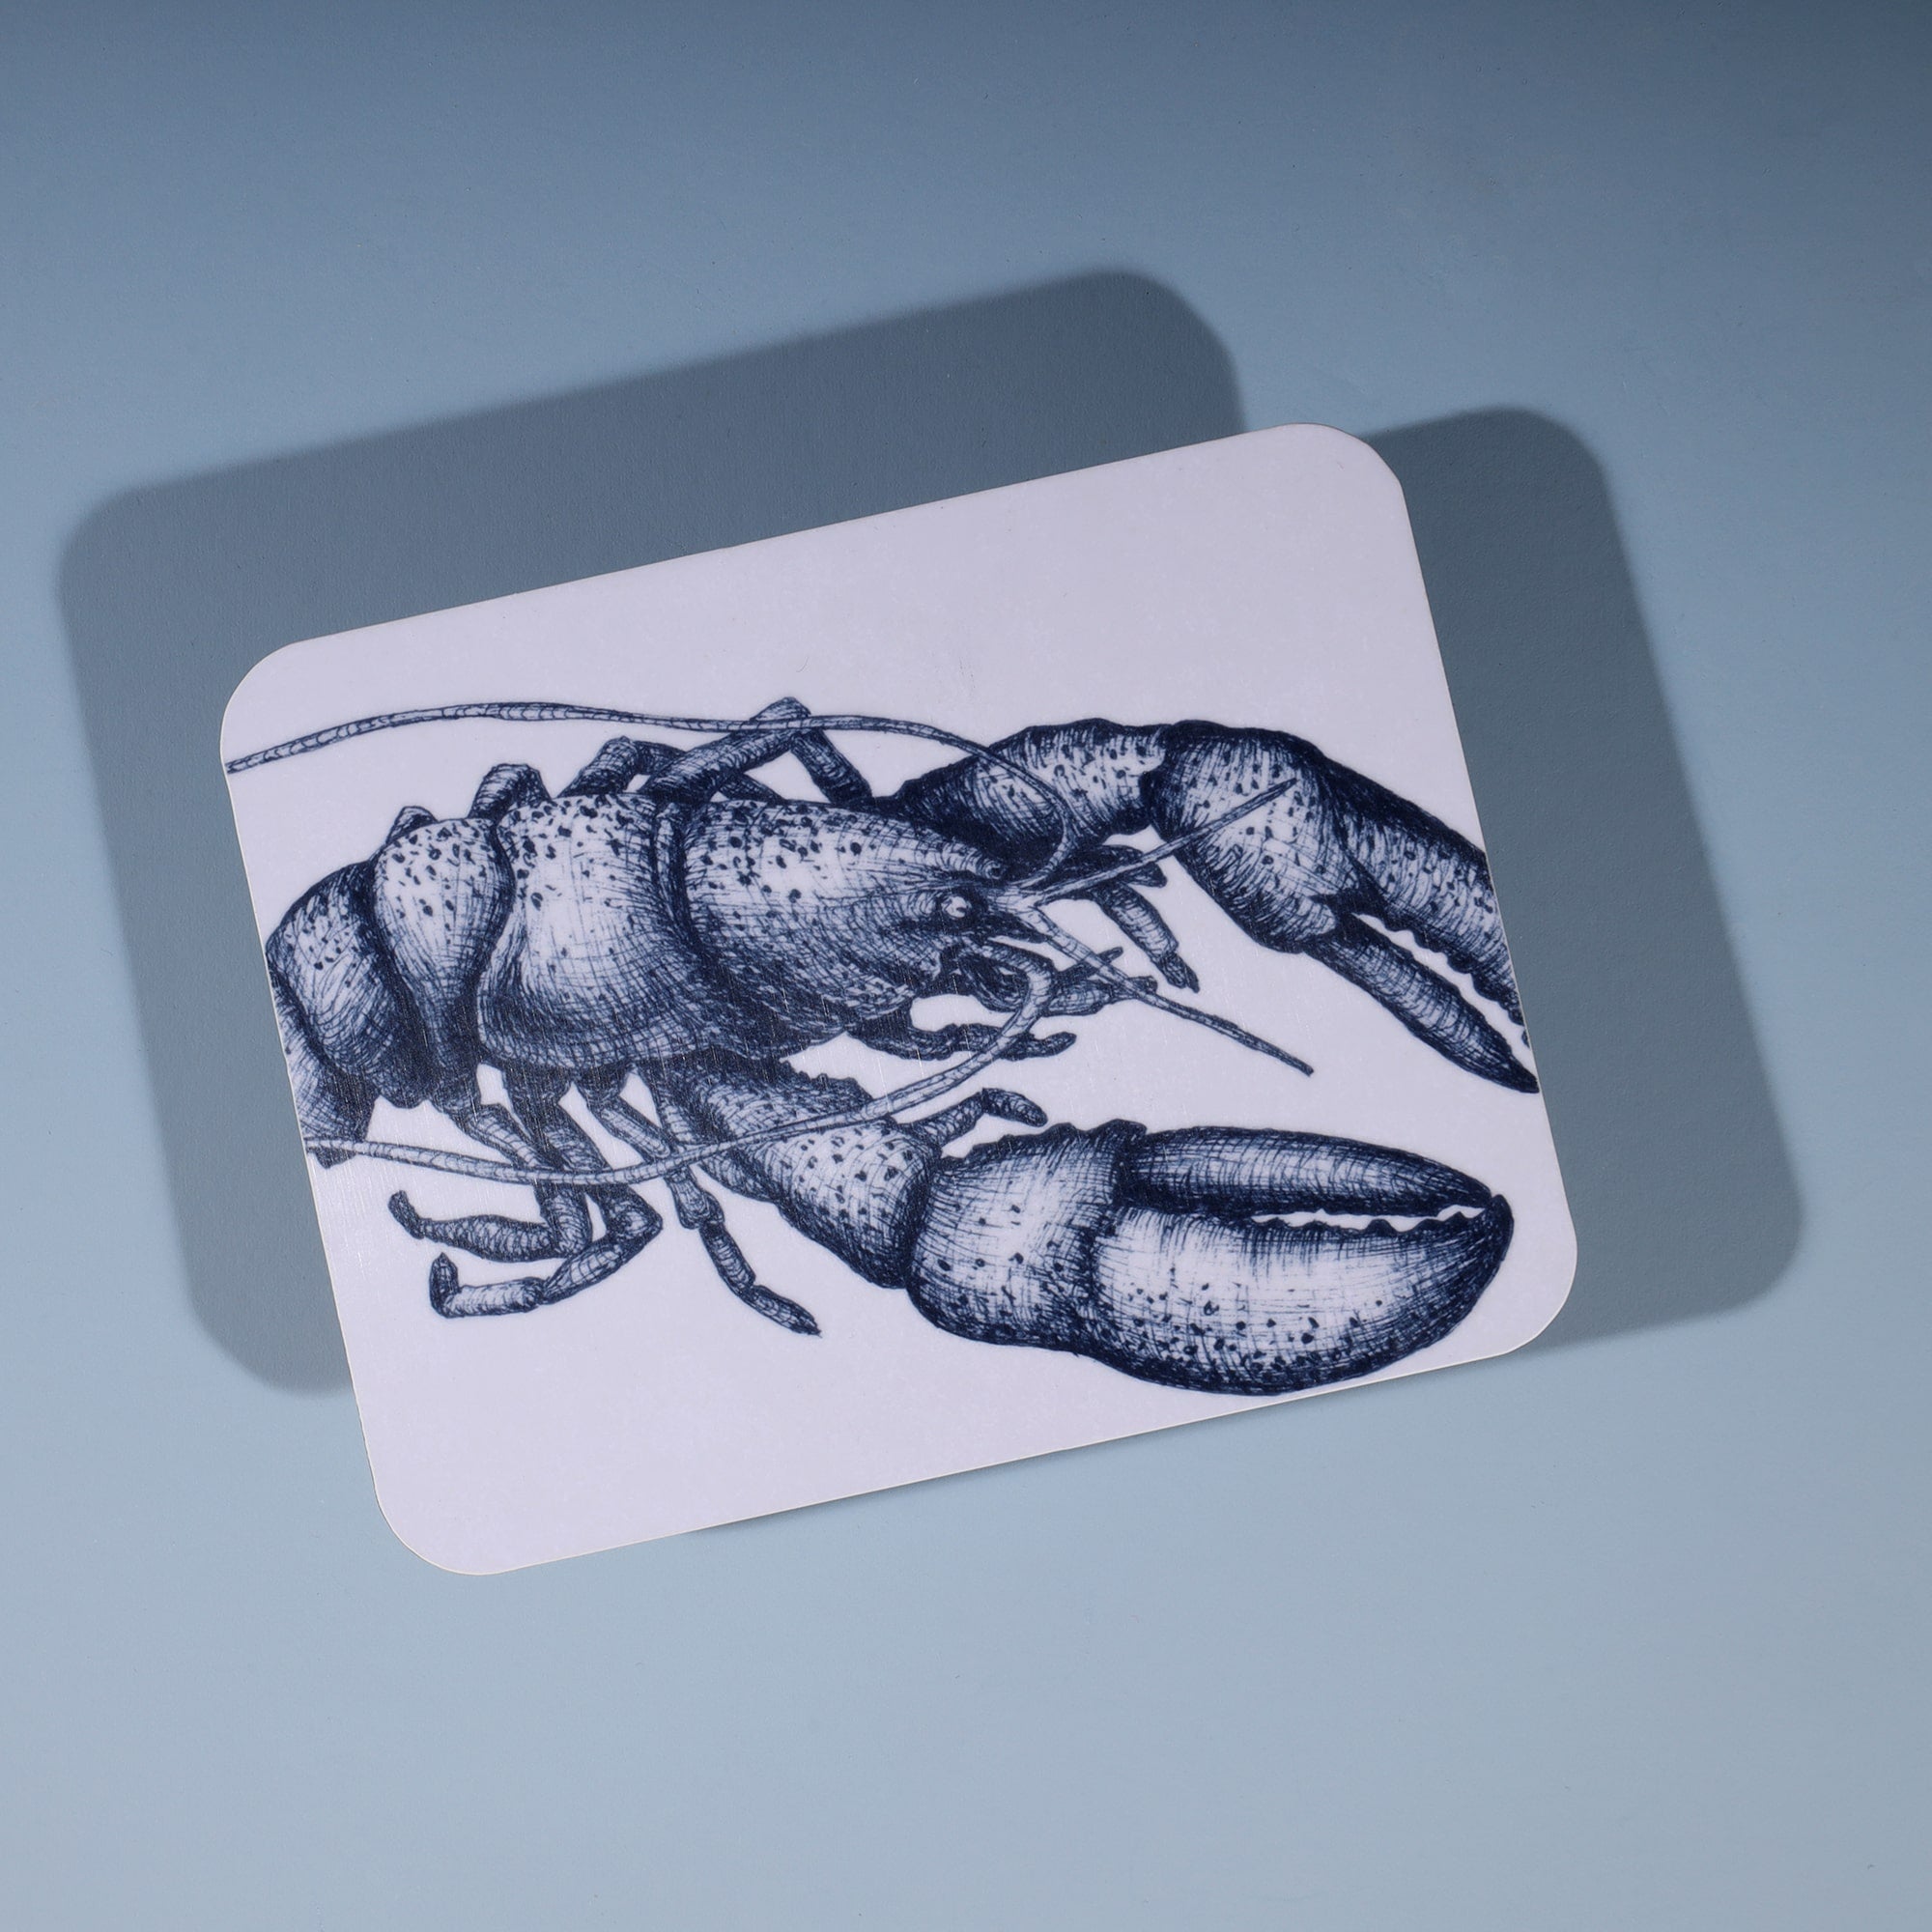 Lobster Design in Navy on a white Coaster